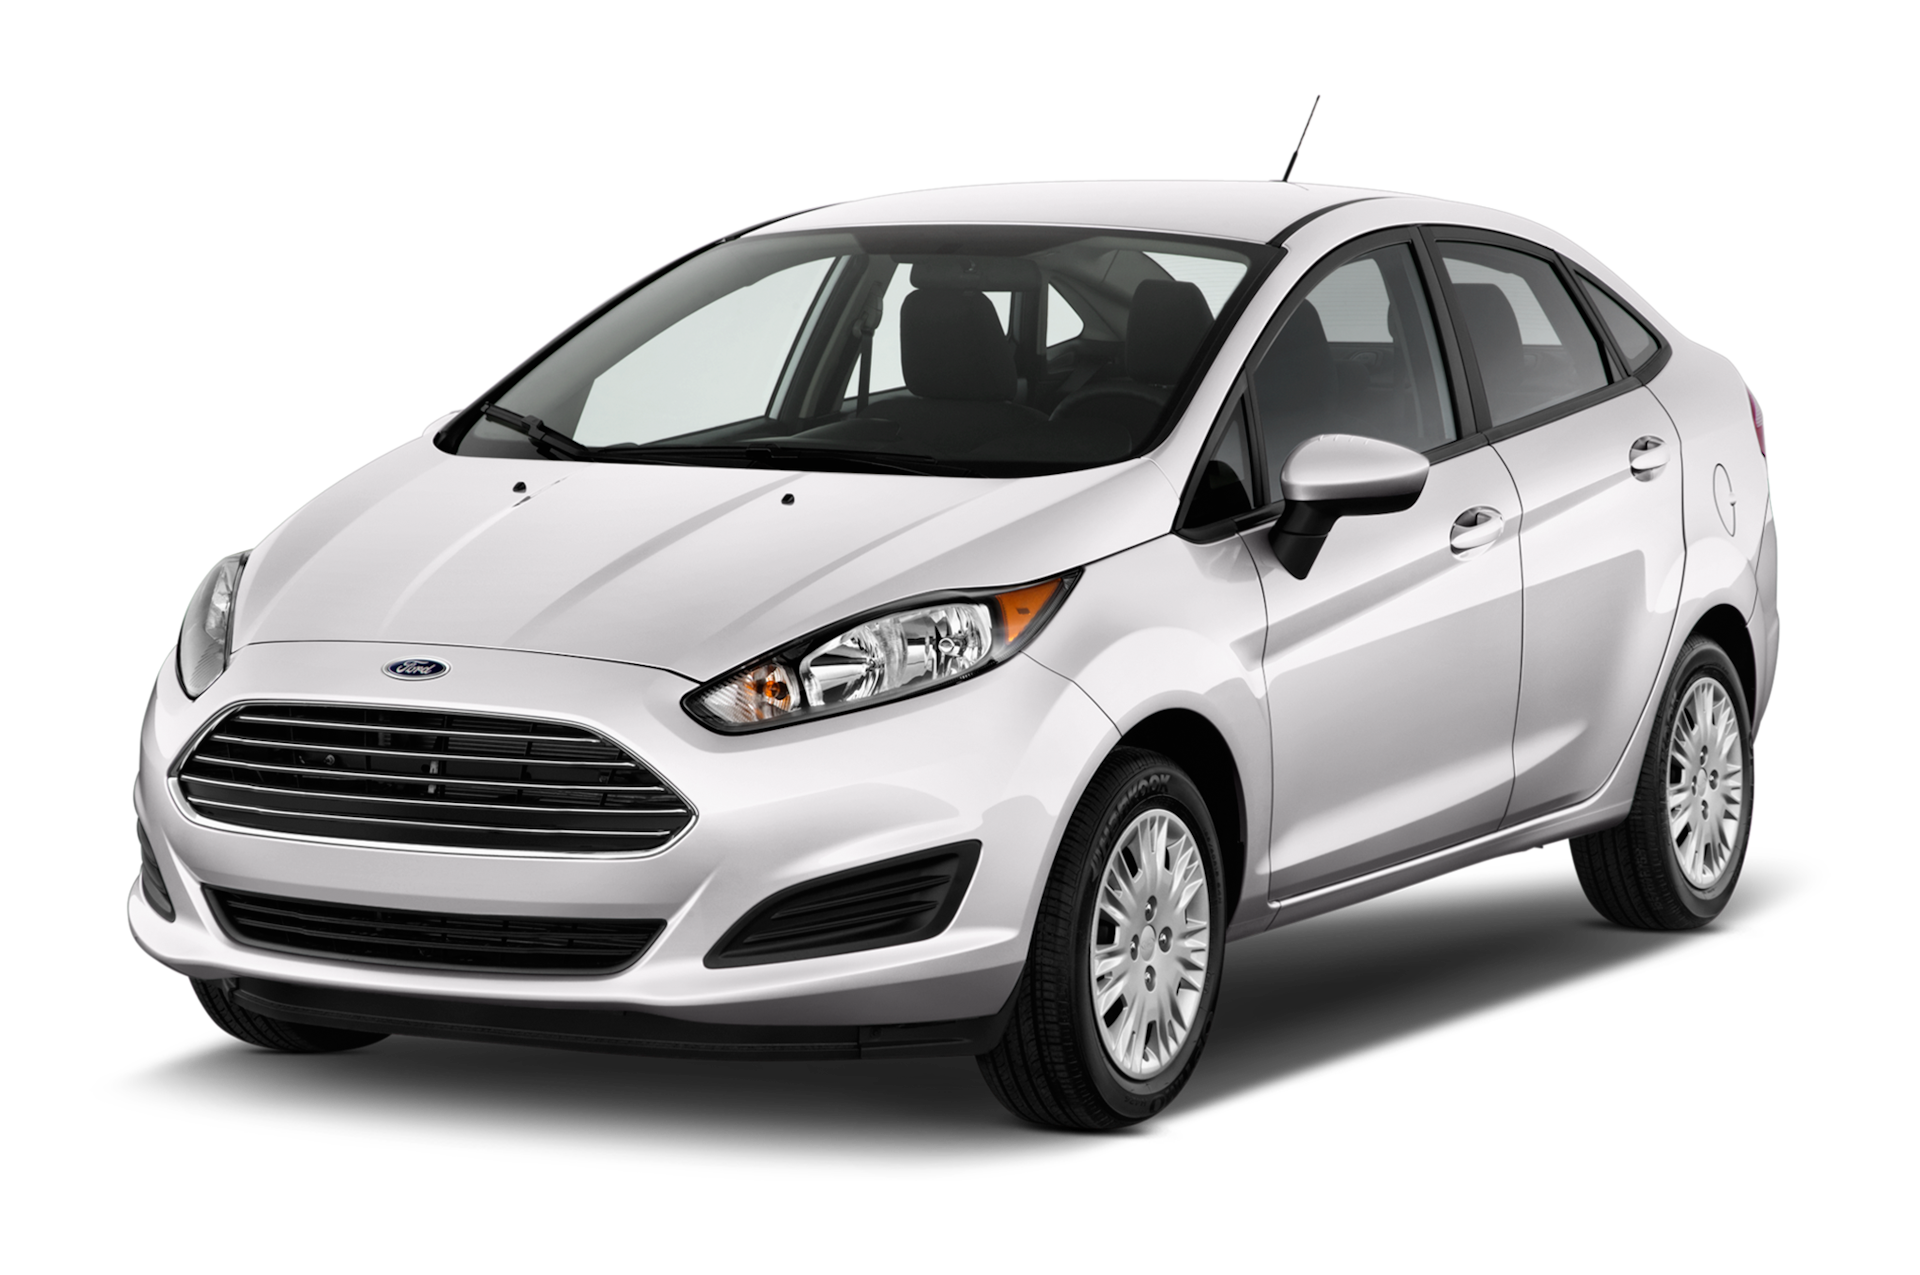 2015 Ford Fiesta Prices, Reviews, and Photos - MotorTrend